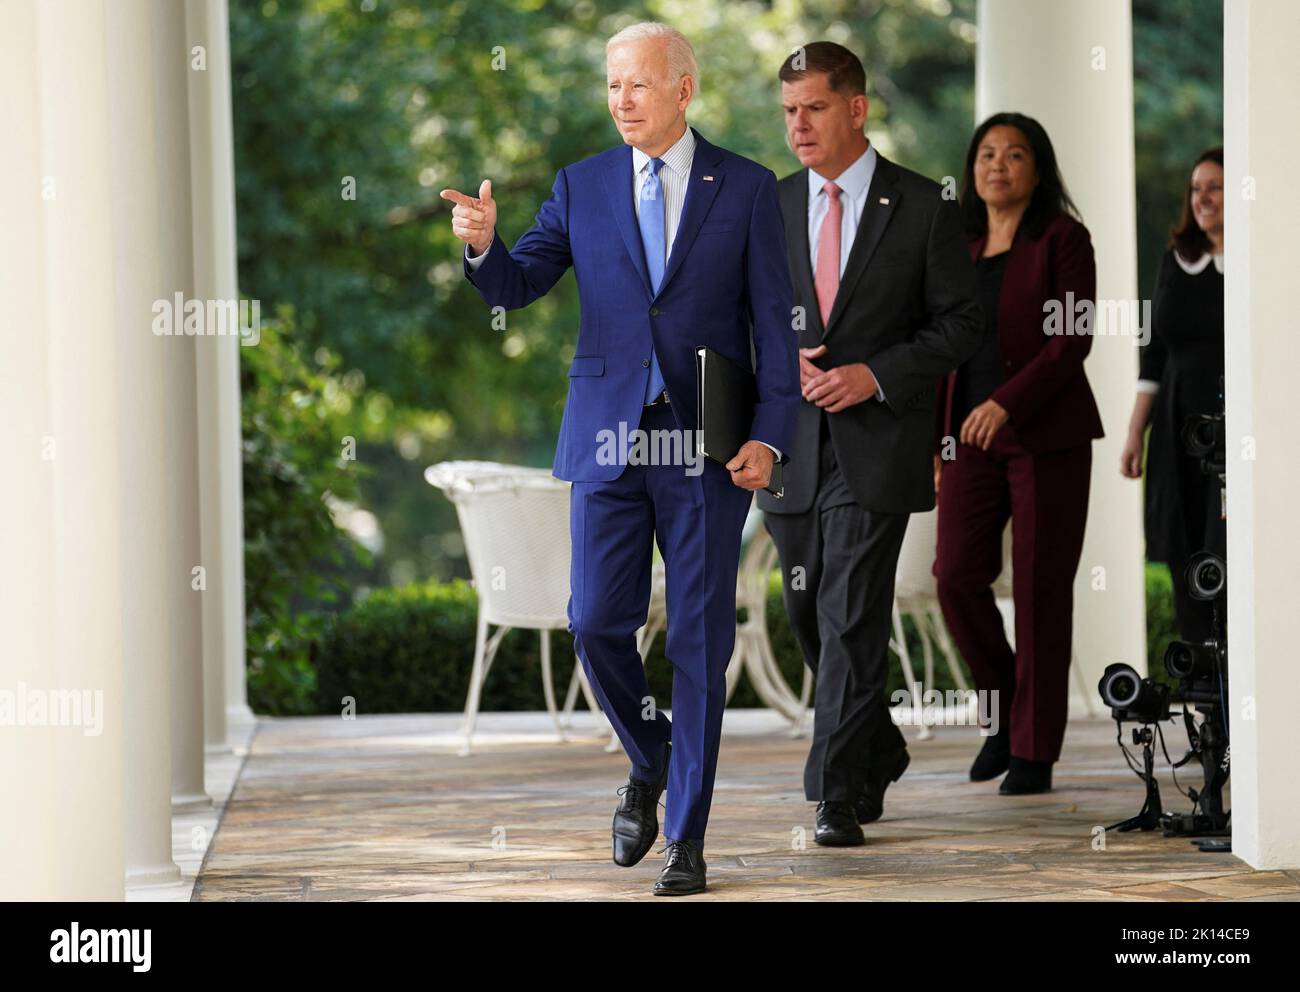 U.S. President Joe Biden is followed by Labor Secretary Marty Walsh and negotiators who brokered the railway labor agreement after U.S. railroads and unions secured a tentative deal to avert a rail shutdown, as he arrives to deliver remarks on the deal in the Rose Garden at the White House in Washington, U.S., September 15, 2022. REUTERS/Kevin Lamarque Stock Photo